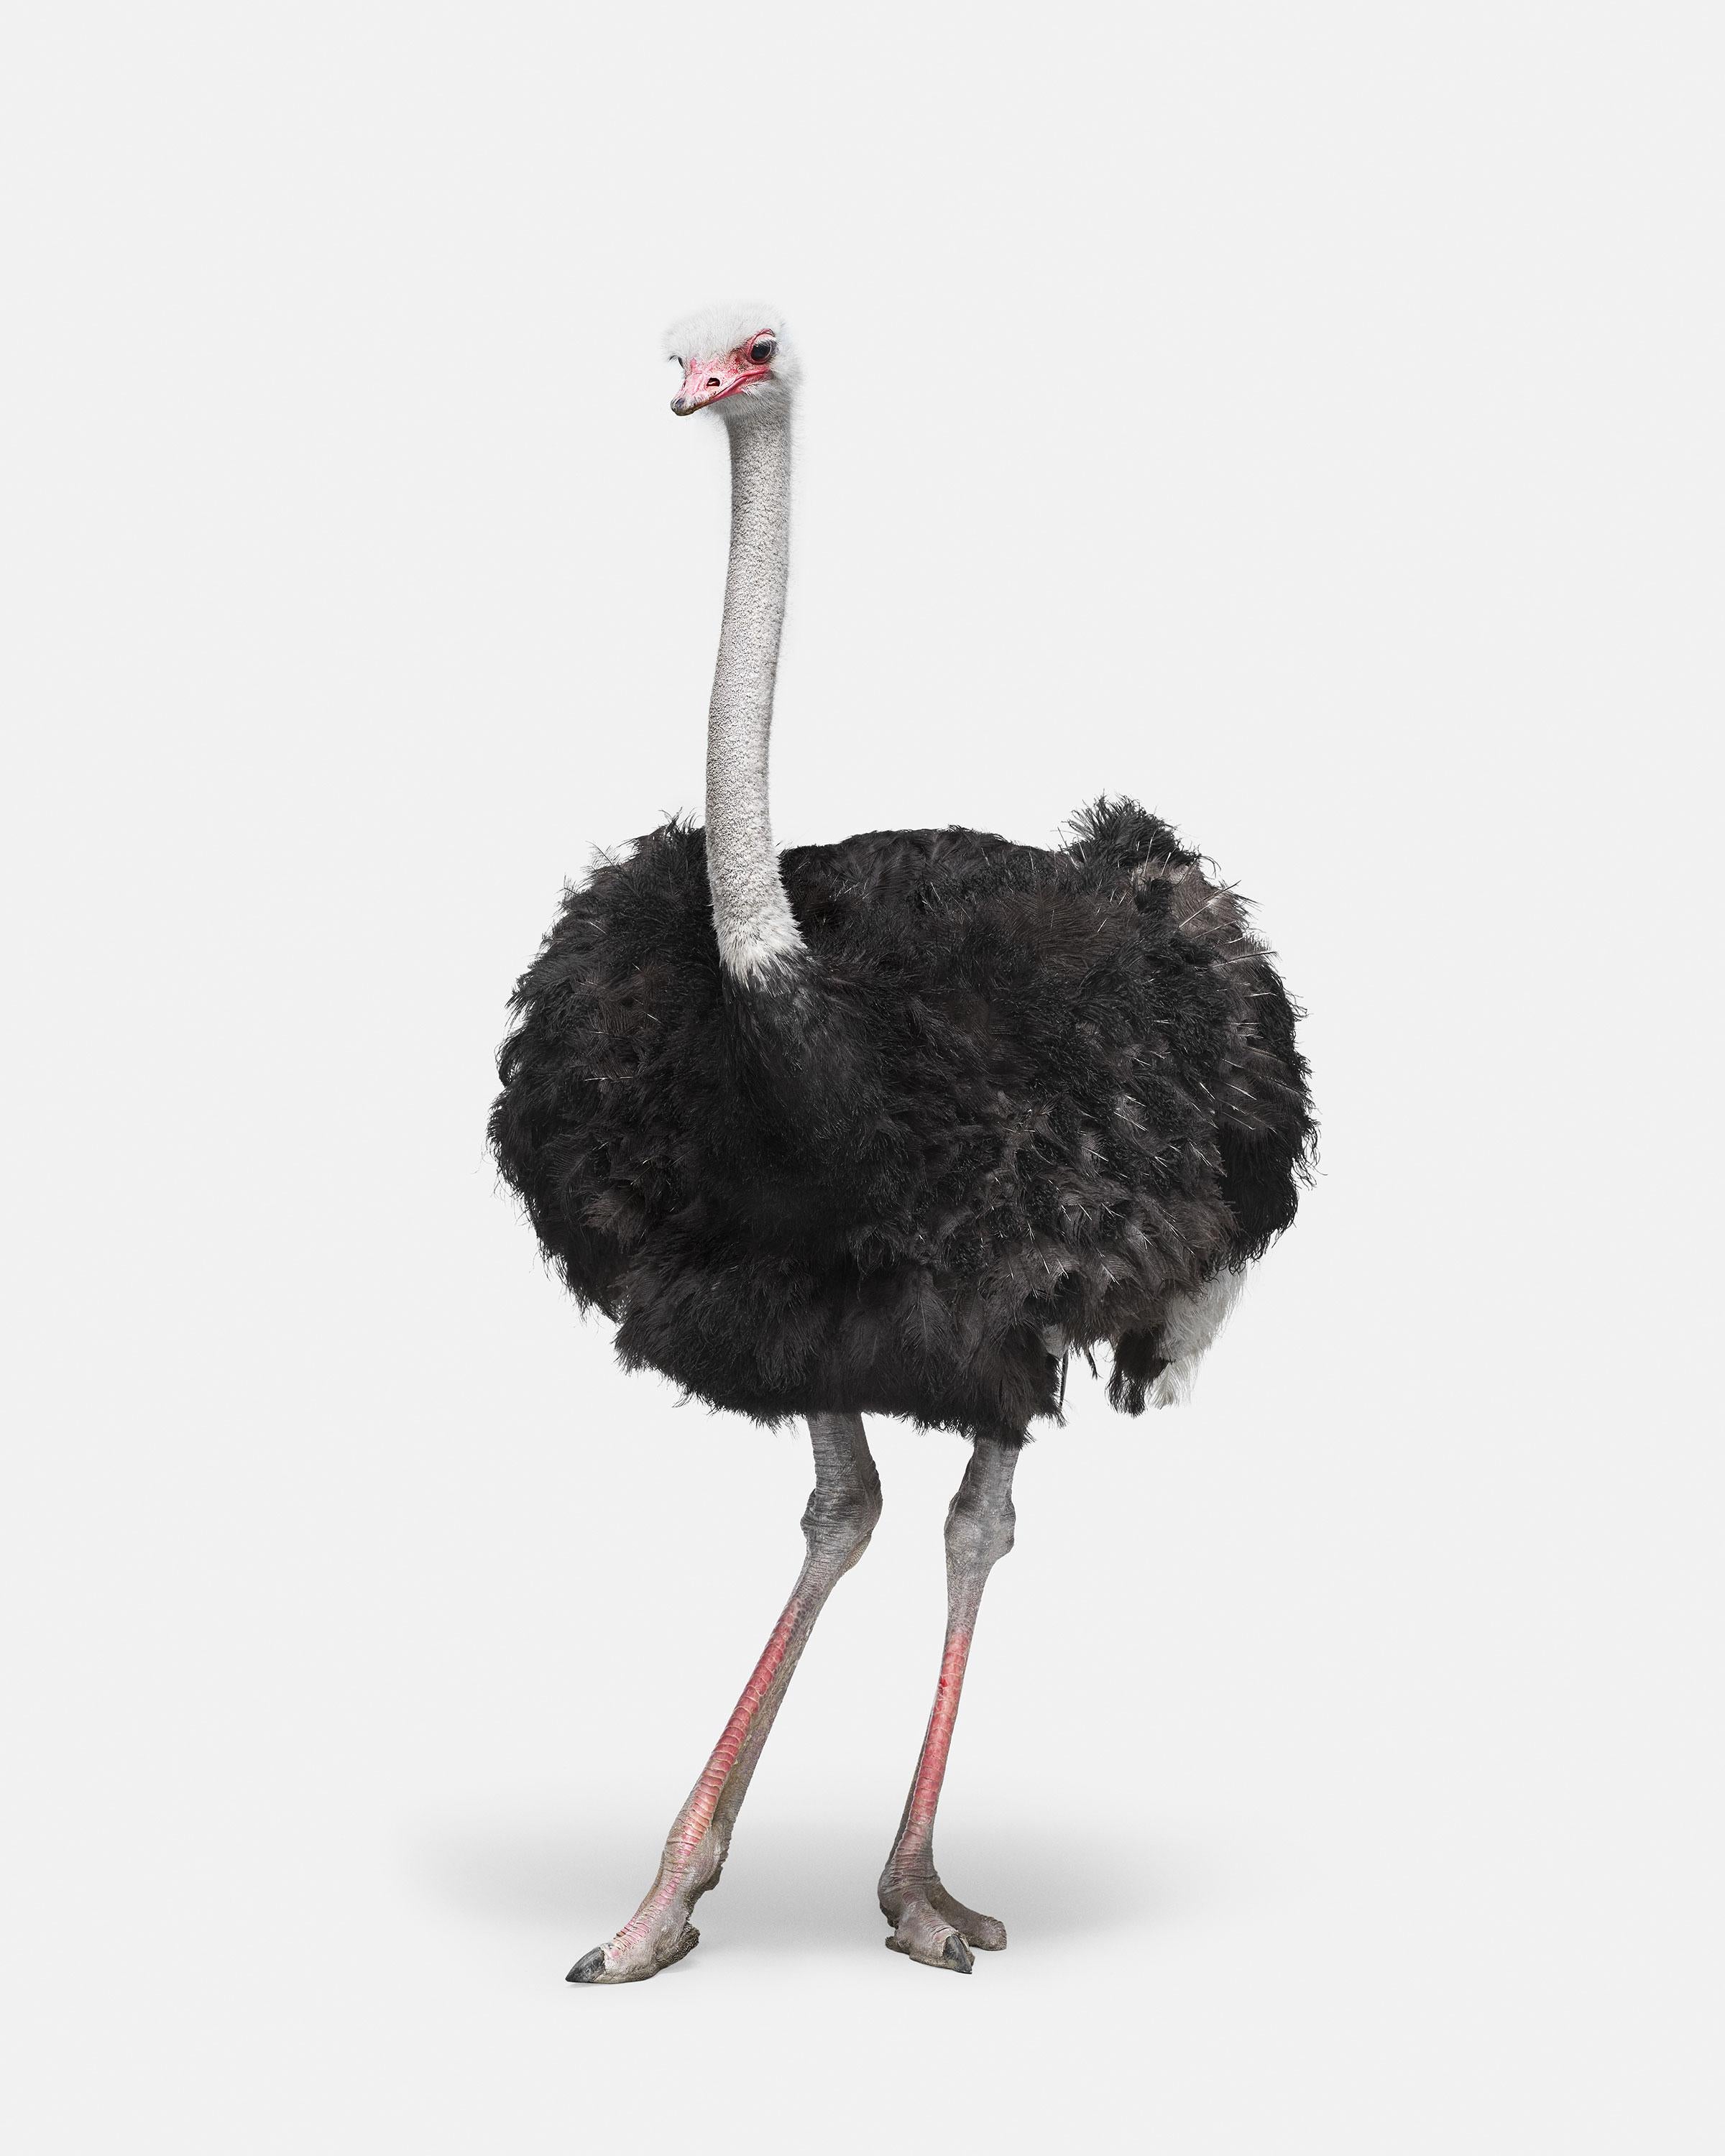 Randal Ford - Ostrich No. 1, Photography 2018, Printed After